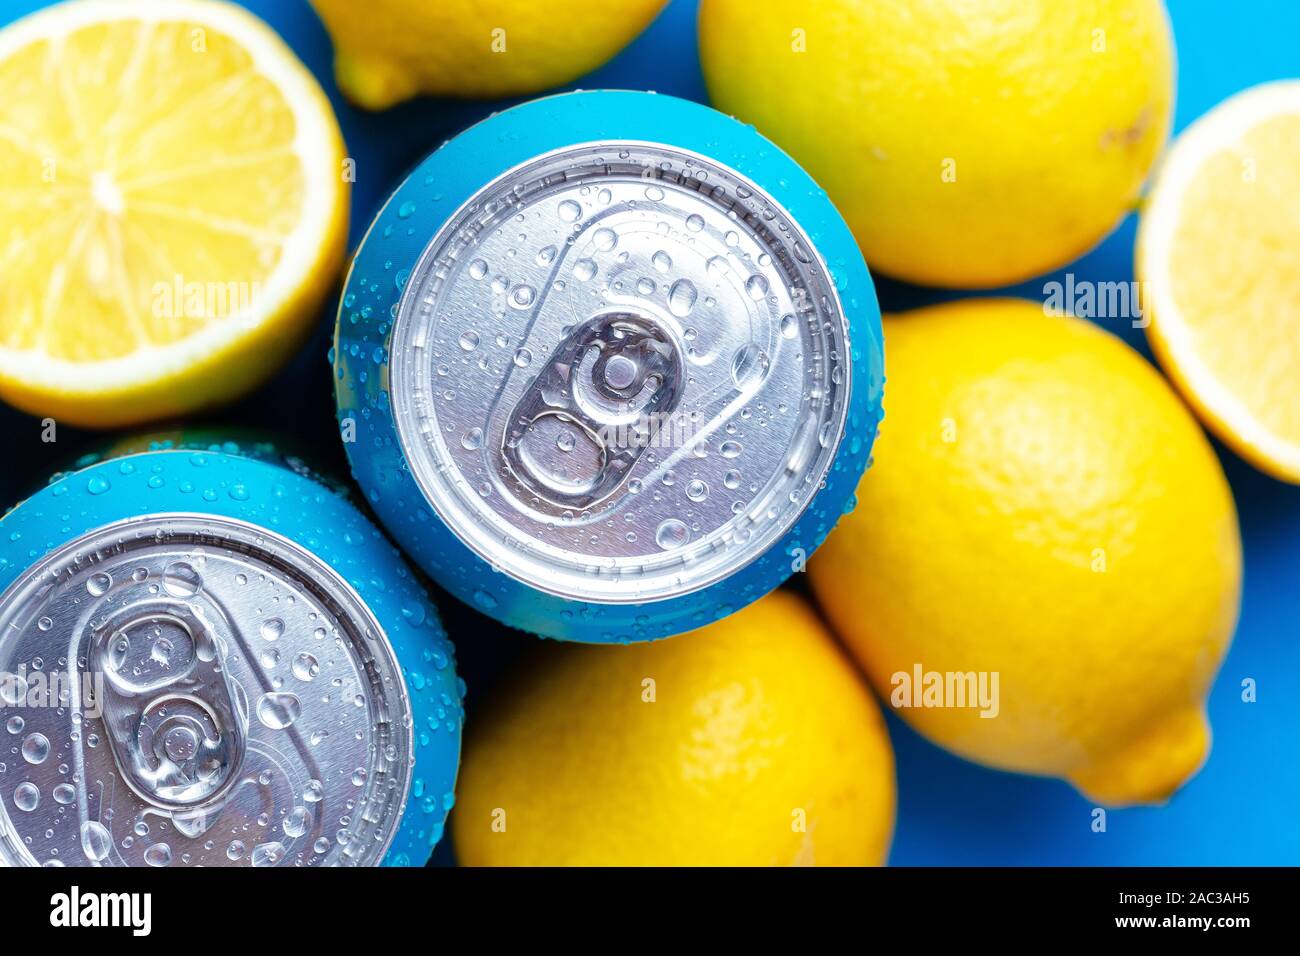 Soda cans and lemons over blue background, Top view, macro shot Stock Photo